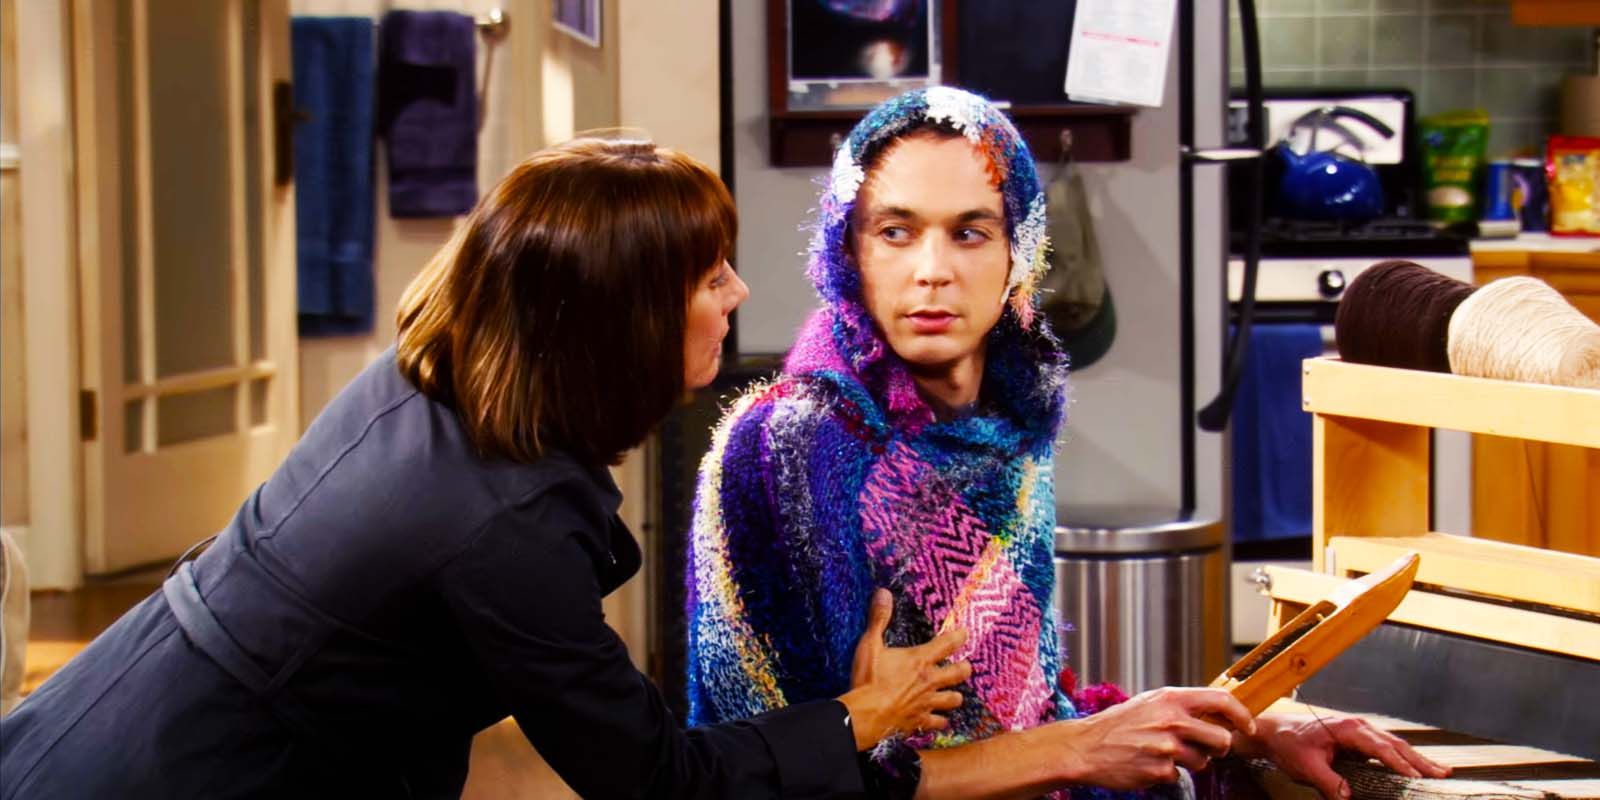 Laurie Metcalf as Mary Cooper and Jim Parsons as Sheldon Cooper in The Big Bang Theory season 1, episode 4